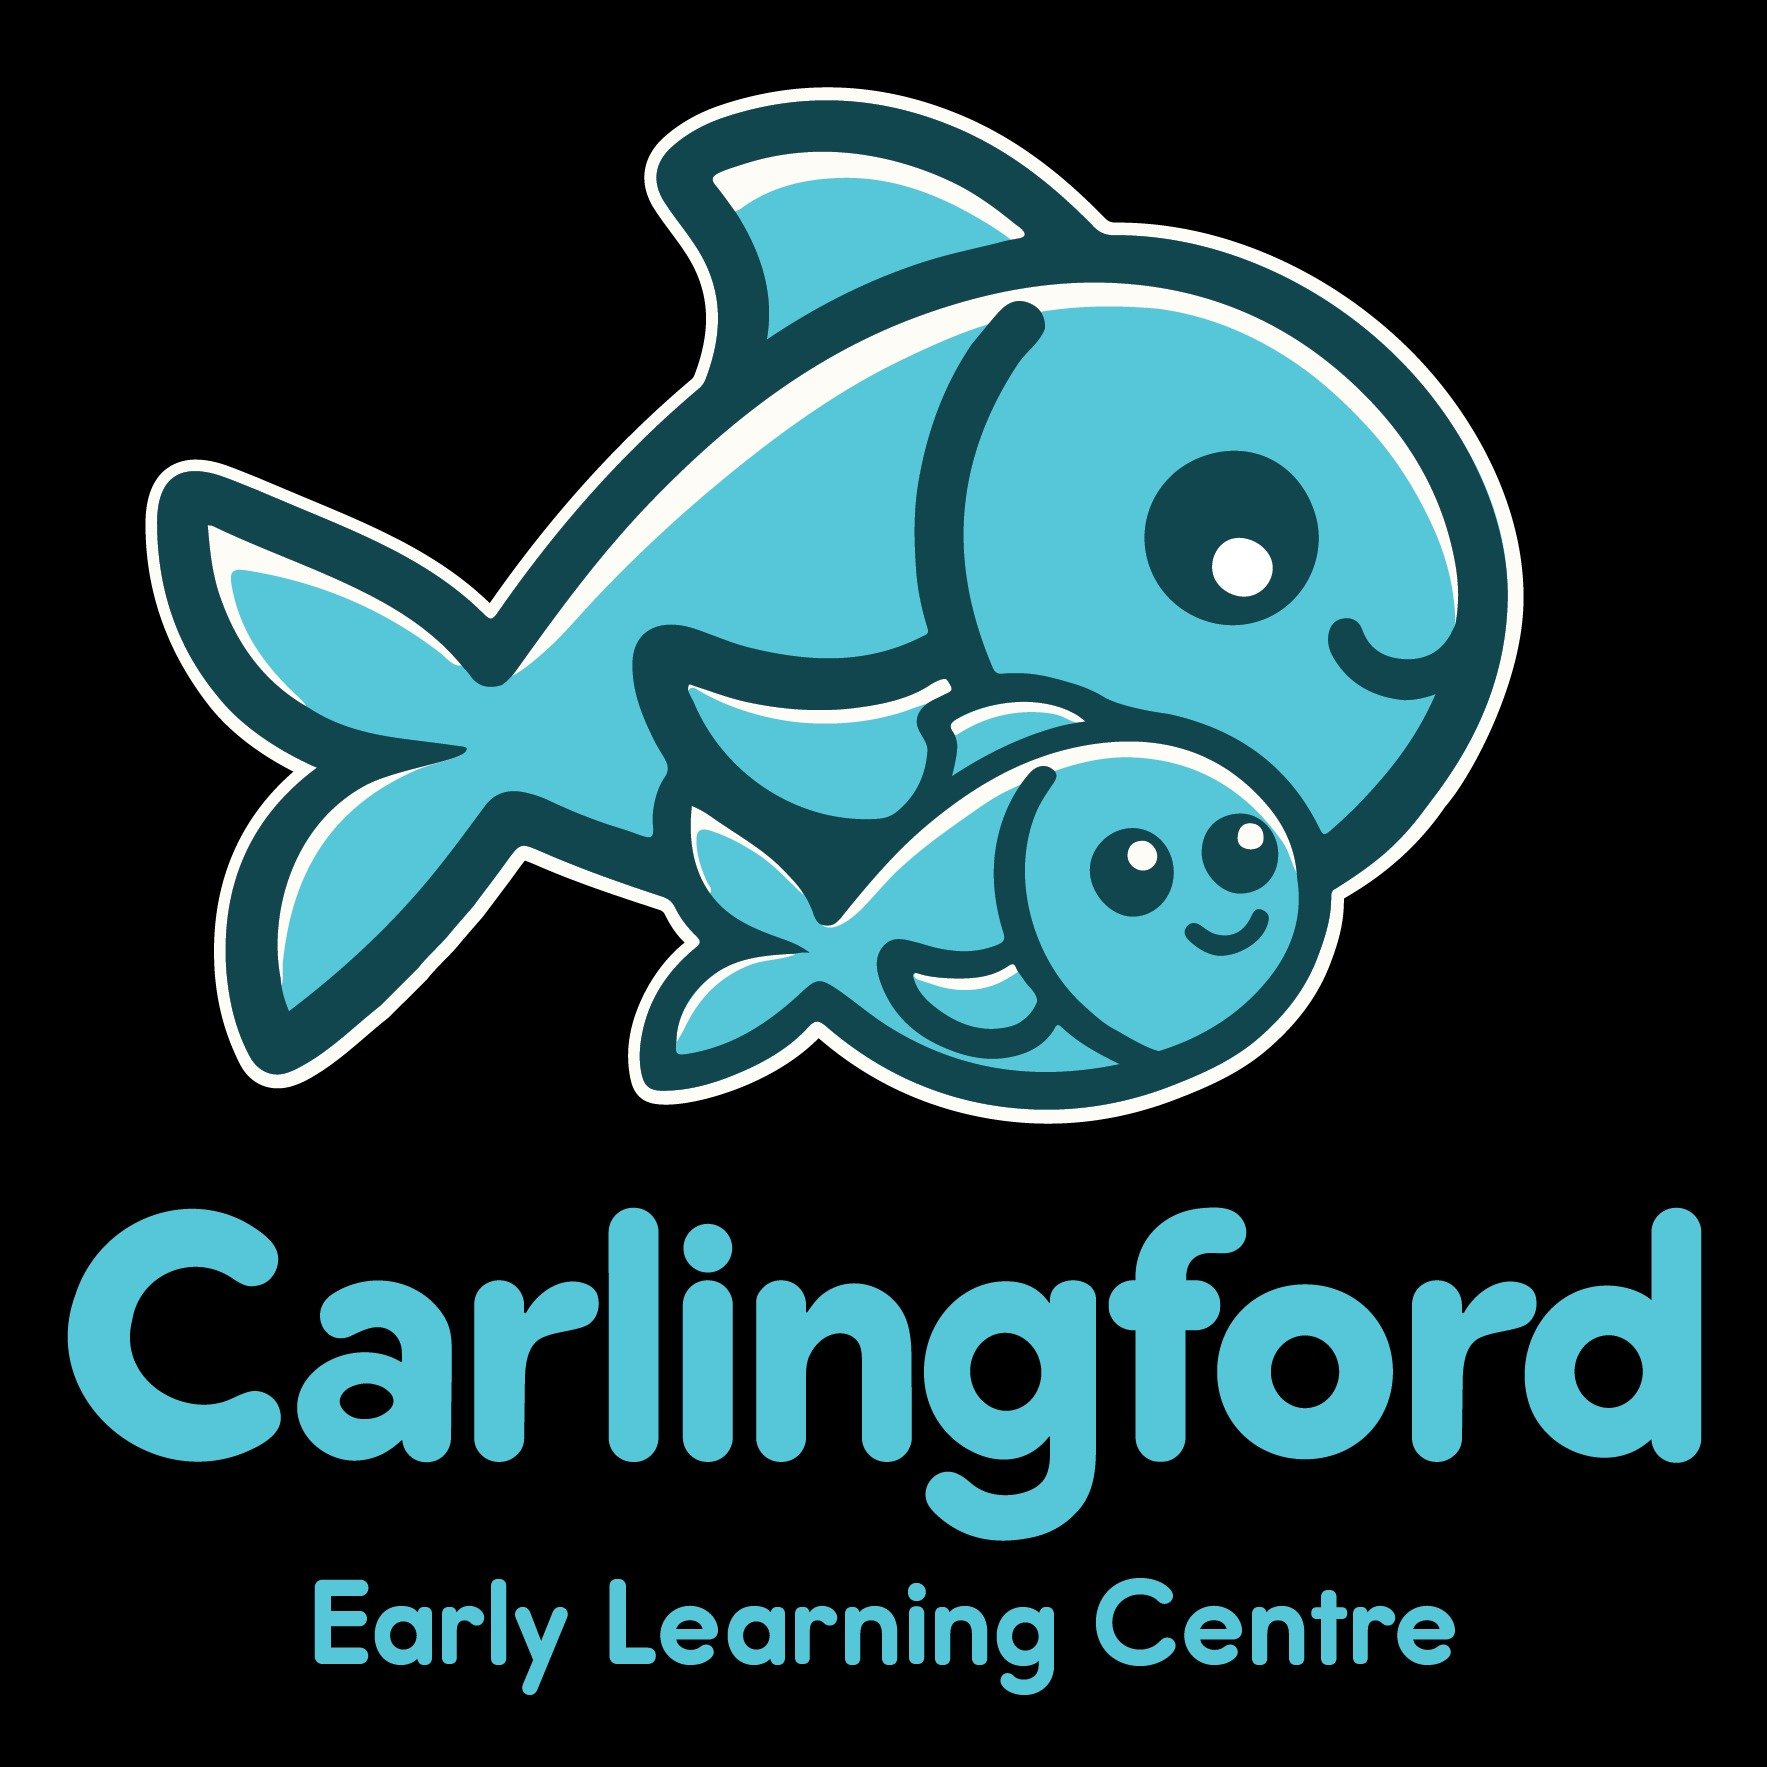 Carlingford Early Learning Centre - Carlingford, NSW 2118 - (02) 8529 0888 | ShowMeLocal.com